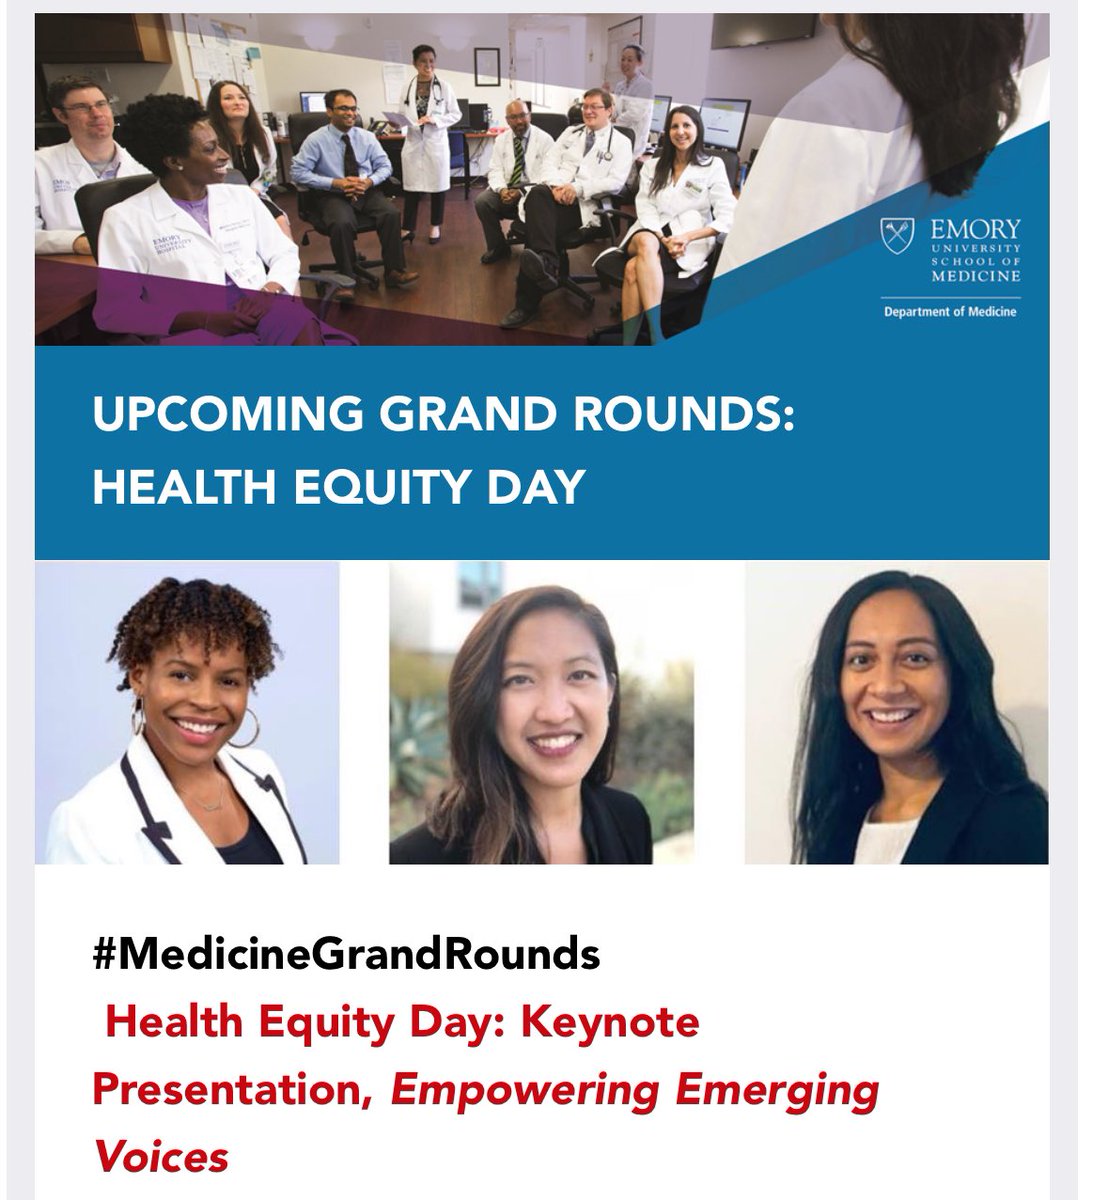 This is about to be SO DOPE. Proud that our @EmoryDOMRyse Health Equity Day Keynote #MedicineGrandRounds will center on emerging voices. The lineup: @LashNolen @tsaiduck77 @DarshaliVyas Can’t wait to hear their insights and wisdom! #healthequity #EmoryHED24